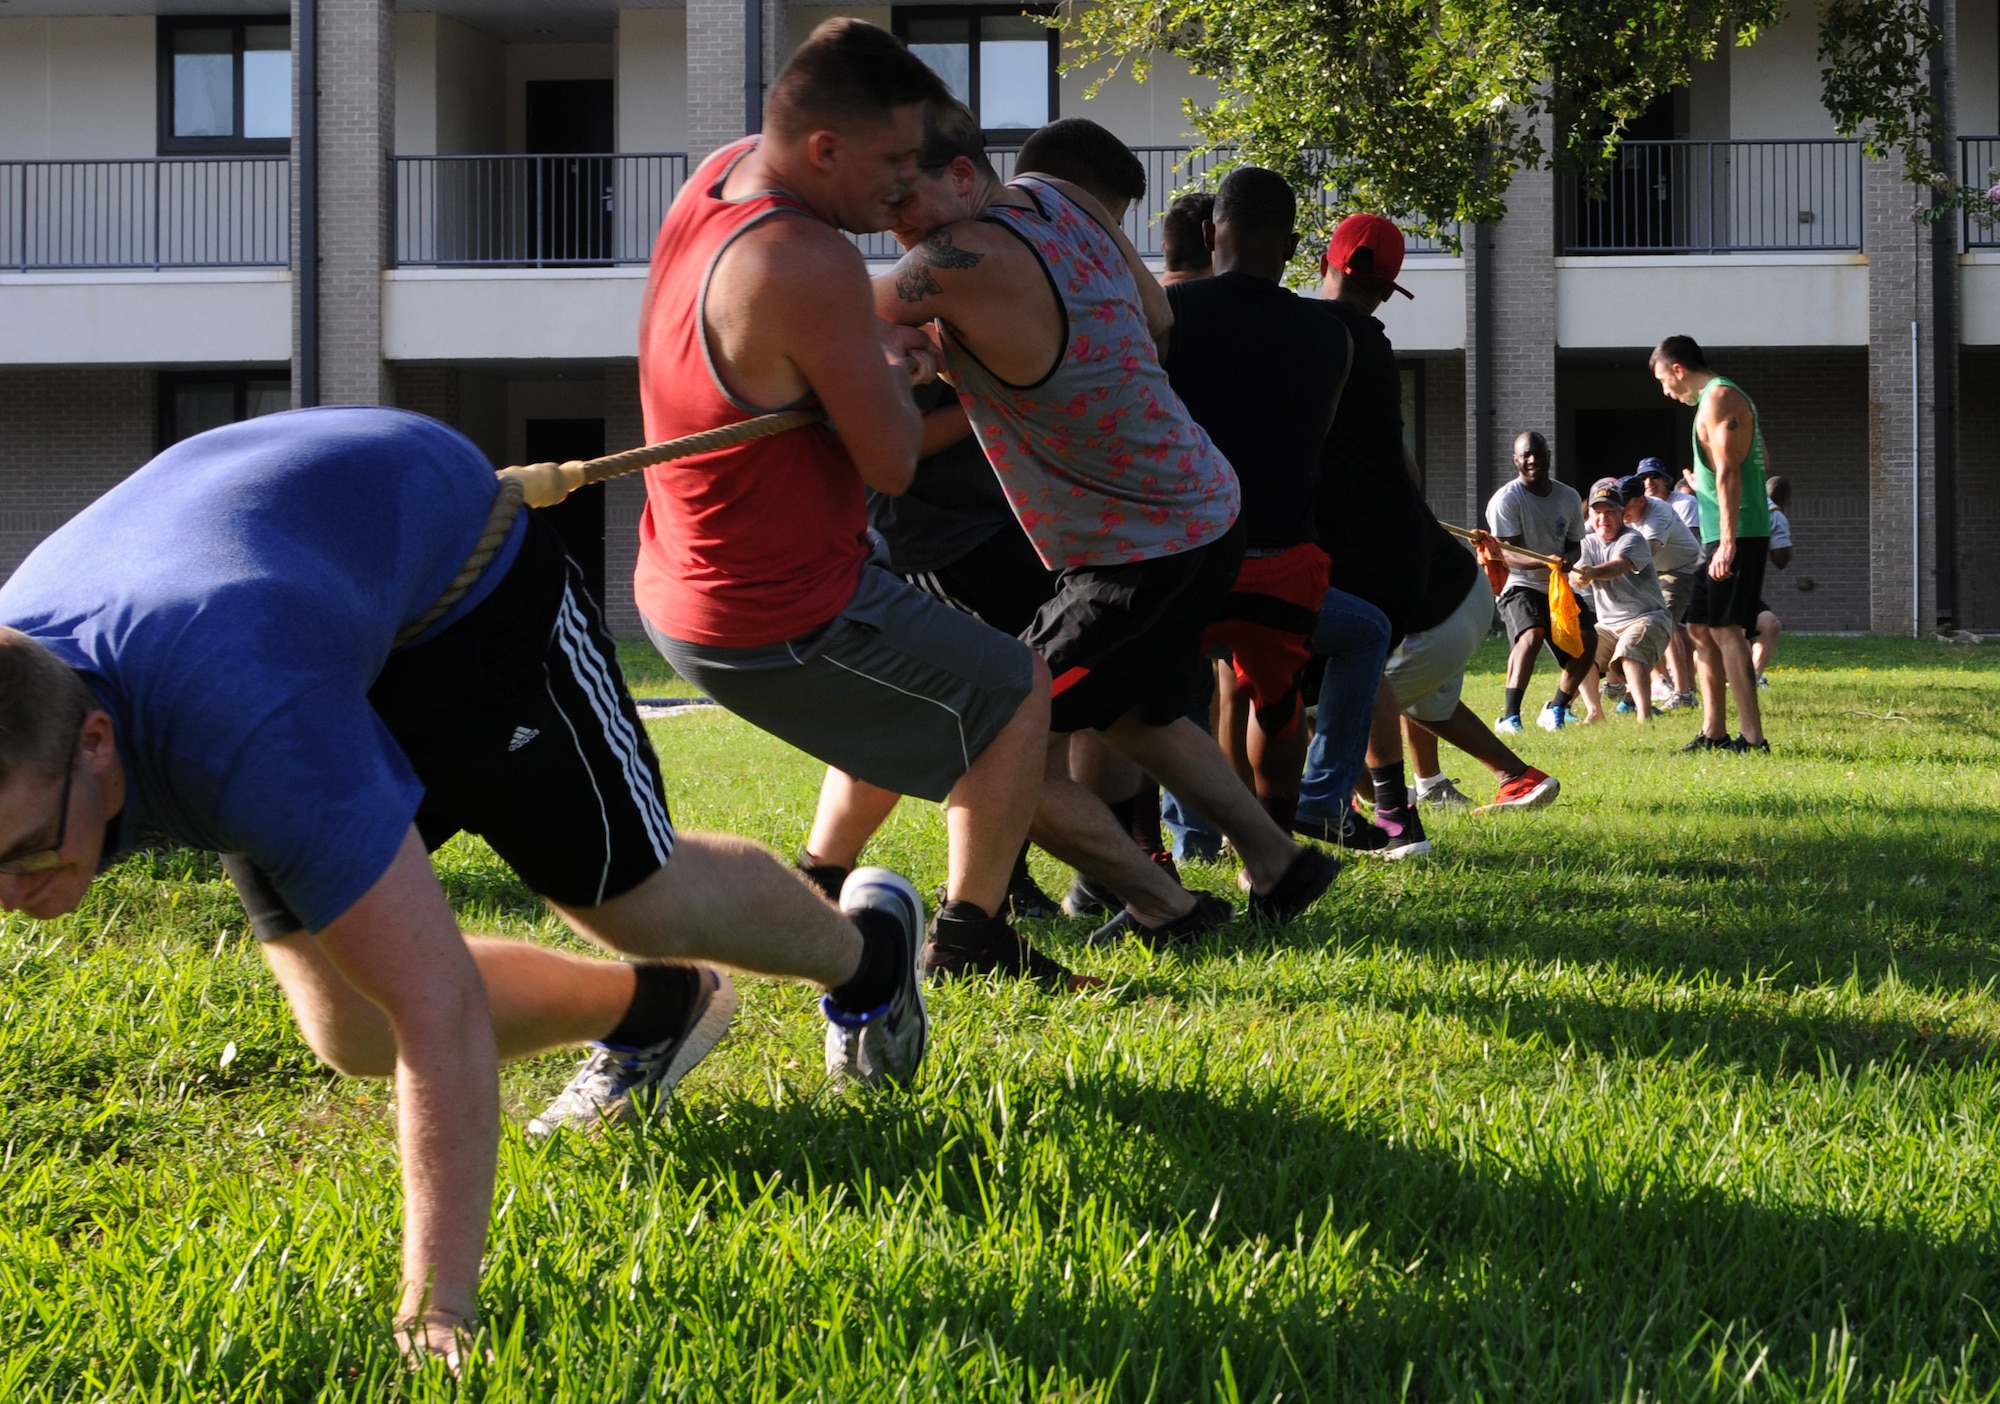 Keesler dorm residents and chief master sergeants play tug-of-war during the 2017 Dorm Bash at the Biloxi Hall courtyard August 1, 2017, on Keesler Air Force Base, Miss. The Dorm Bash was sponsored by the Keesler Chiefs Group to provide an opportunity for Keesler dorm residents to spend time together in fellowship. The chief master sergeants took home the Battle of the Bash Dragon award. (U.S. Air Force photo by Airman 1st Class Suzanna Plotnikov)